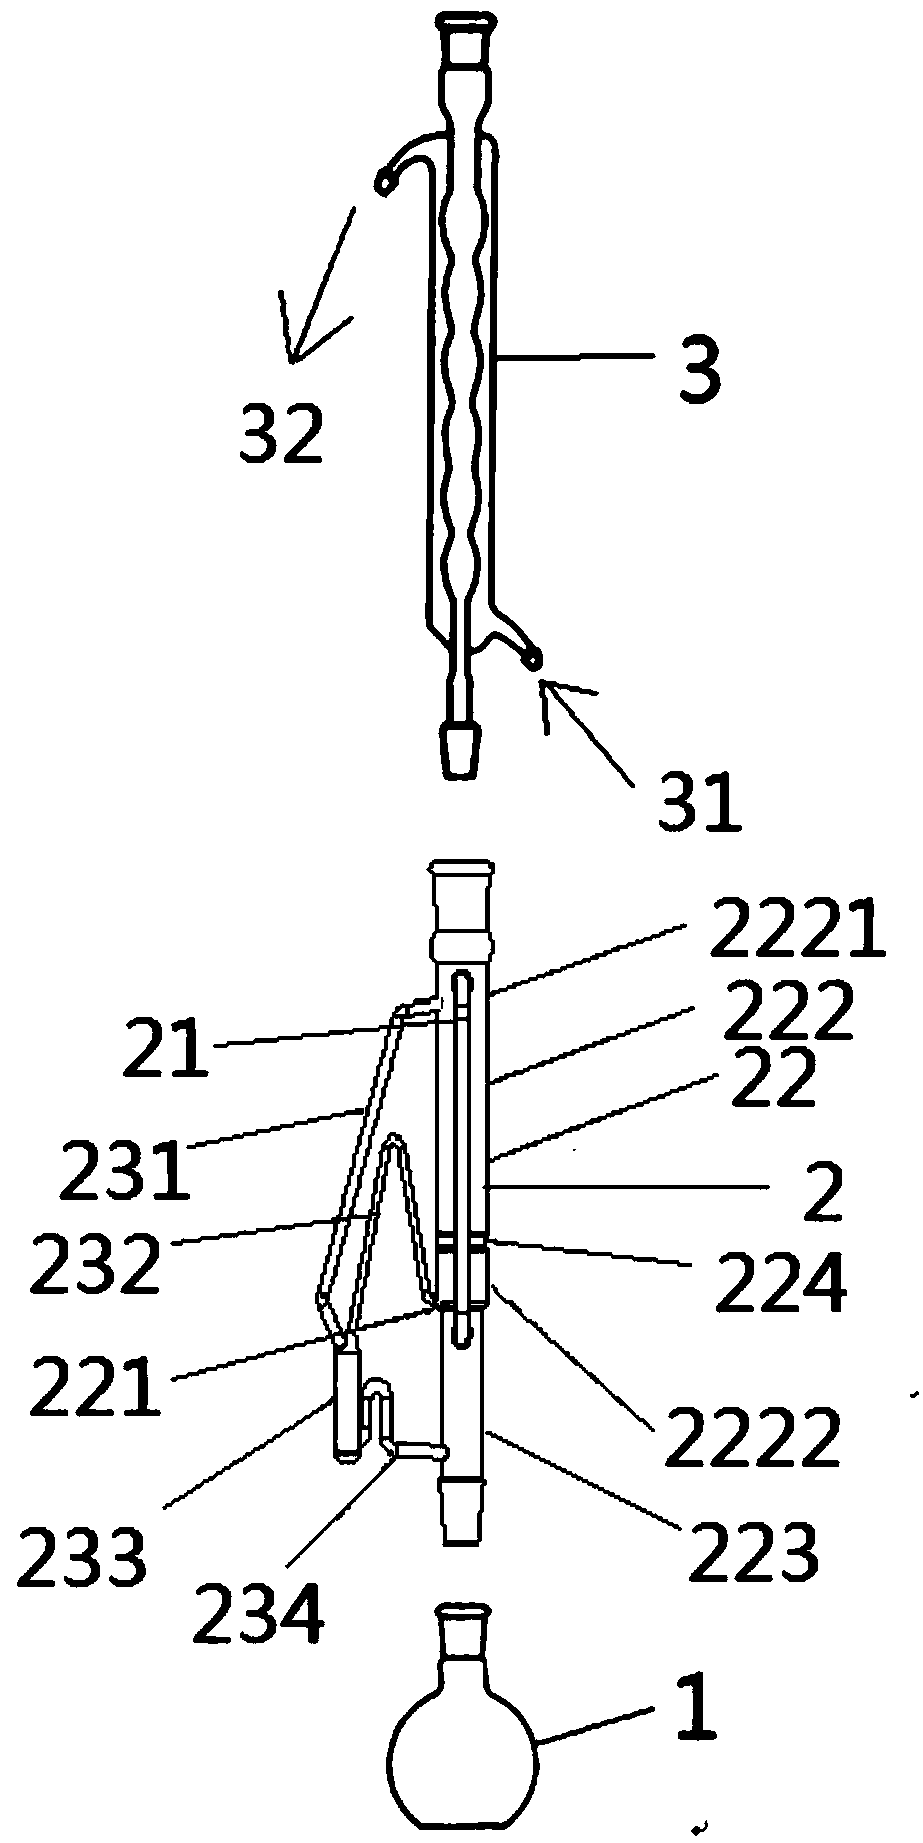 Reflux extraction device and extraction tube